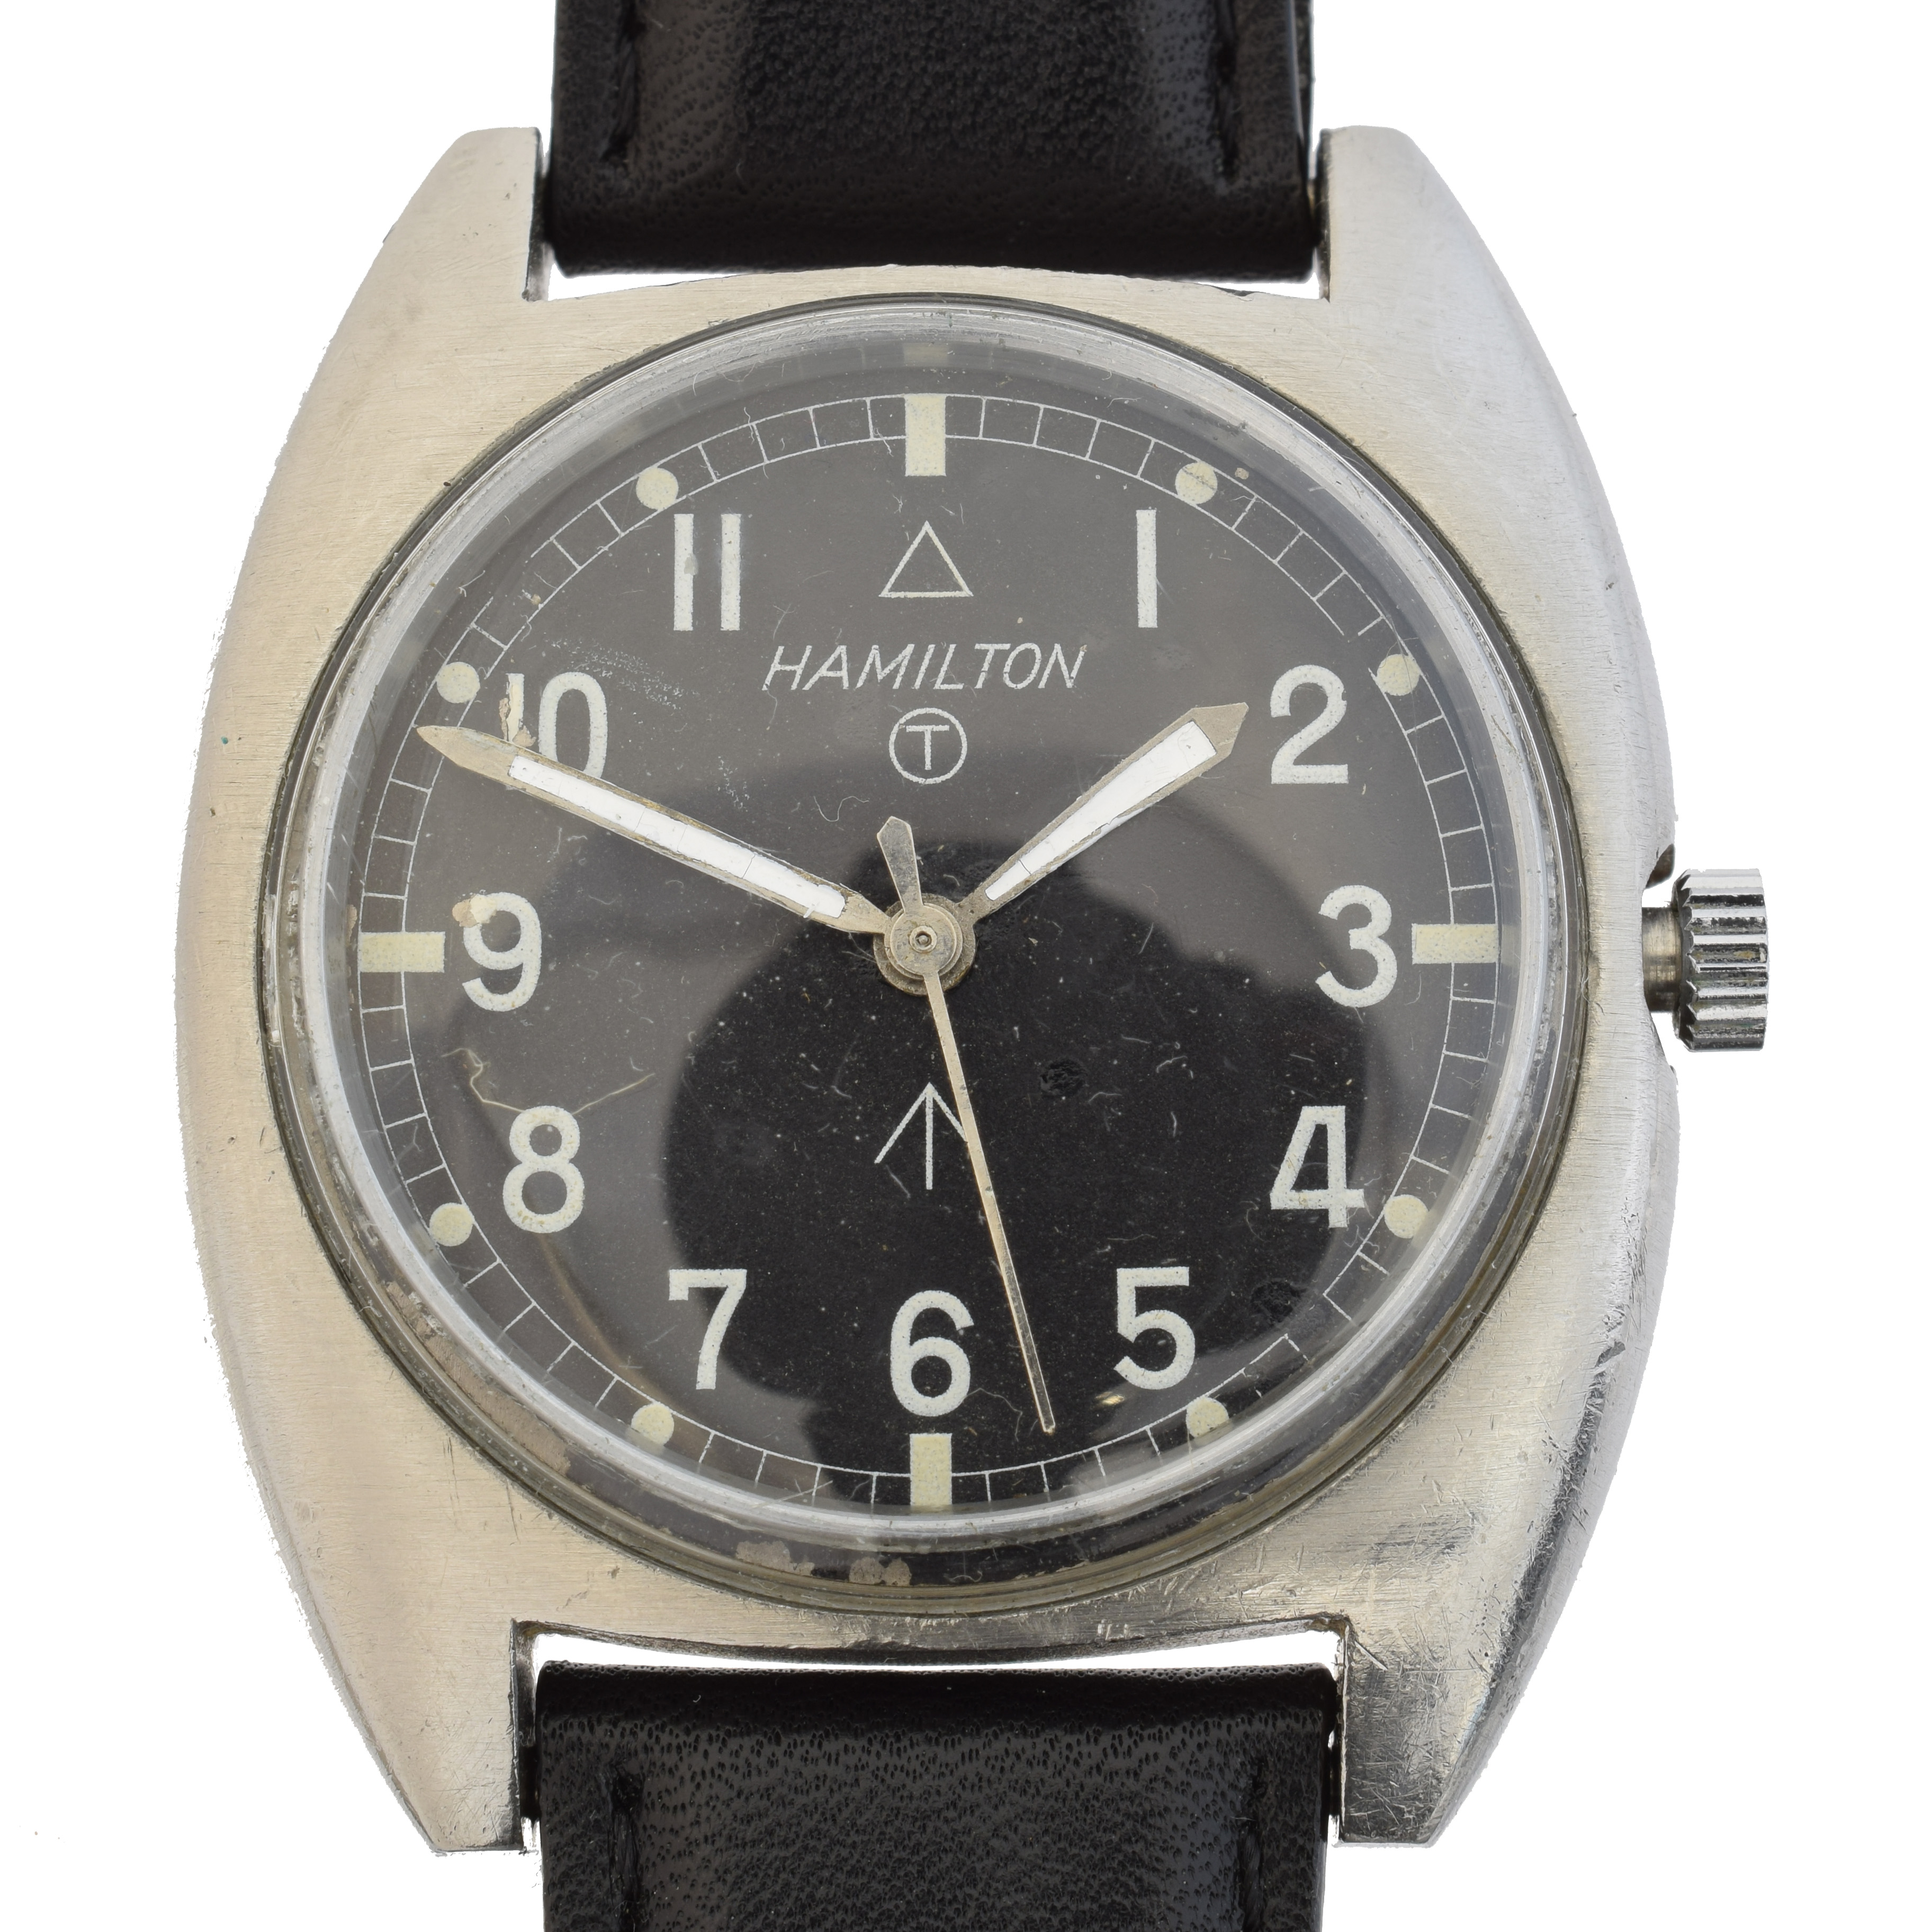 Hamilton military government issue watch